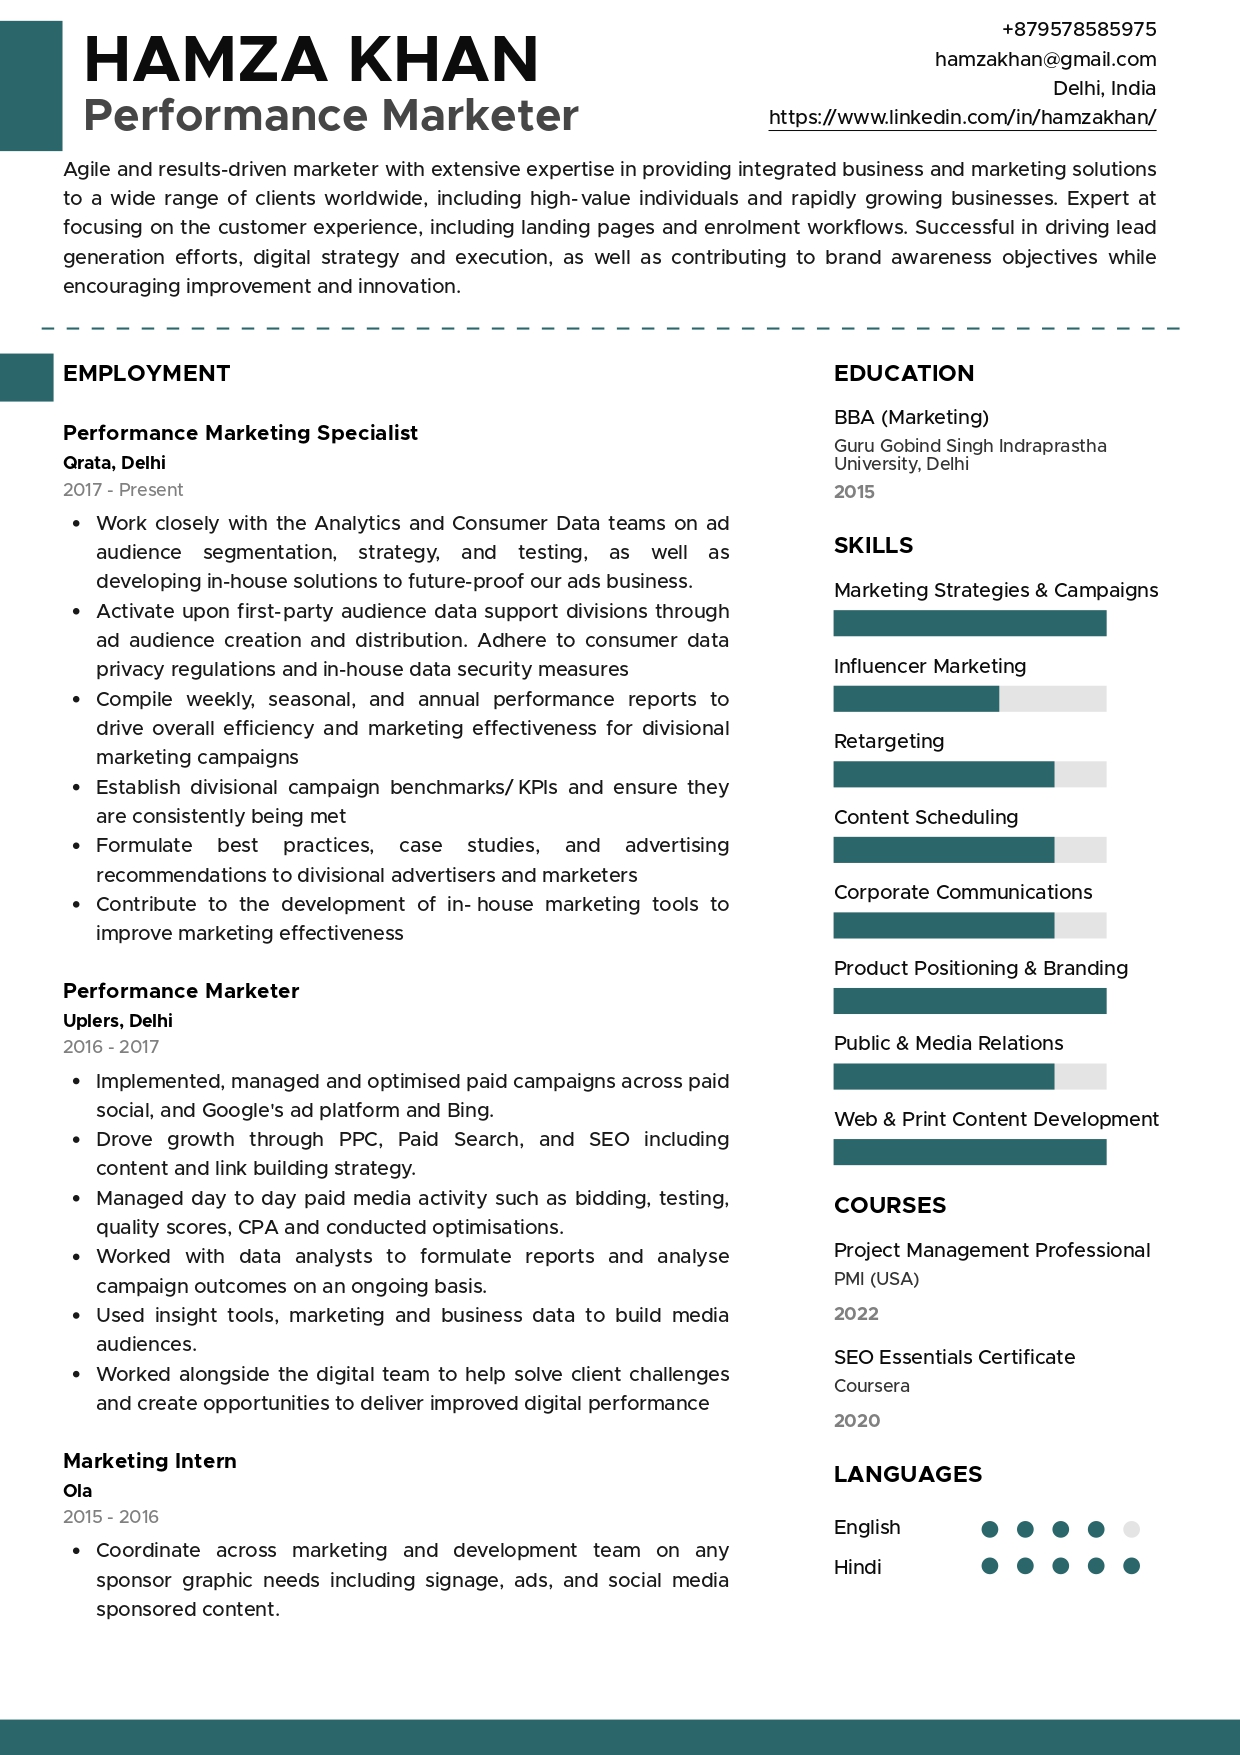 Sample Resume of Performance Marketer | Free Resume Templates & Samples on Resumod.co